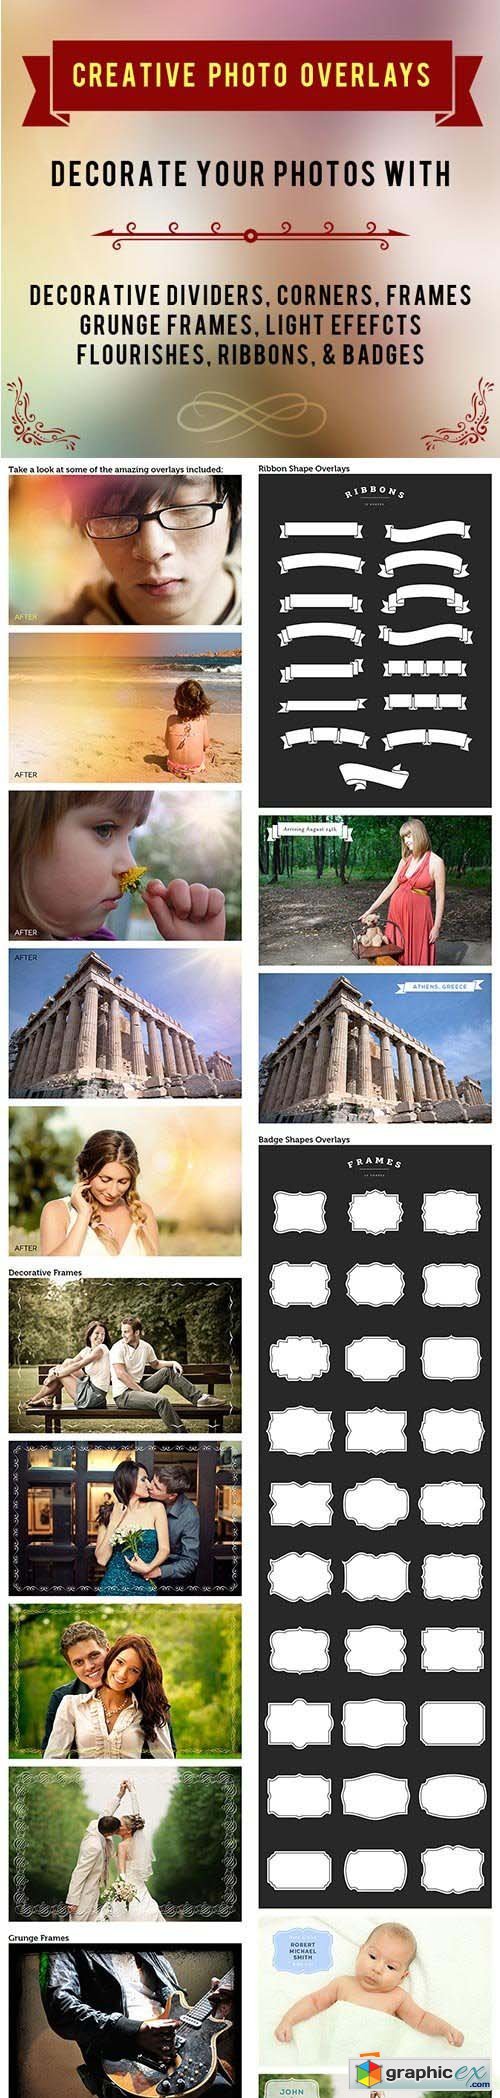 250+ Creative Photo Overlays to Enhance Your Images